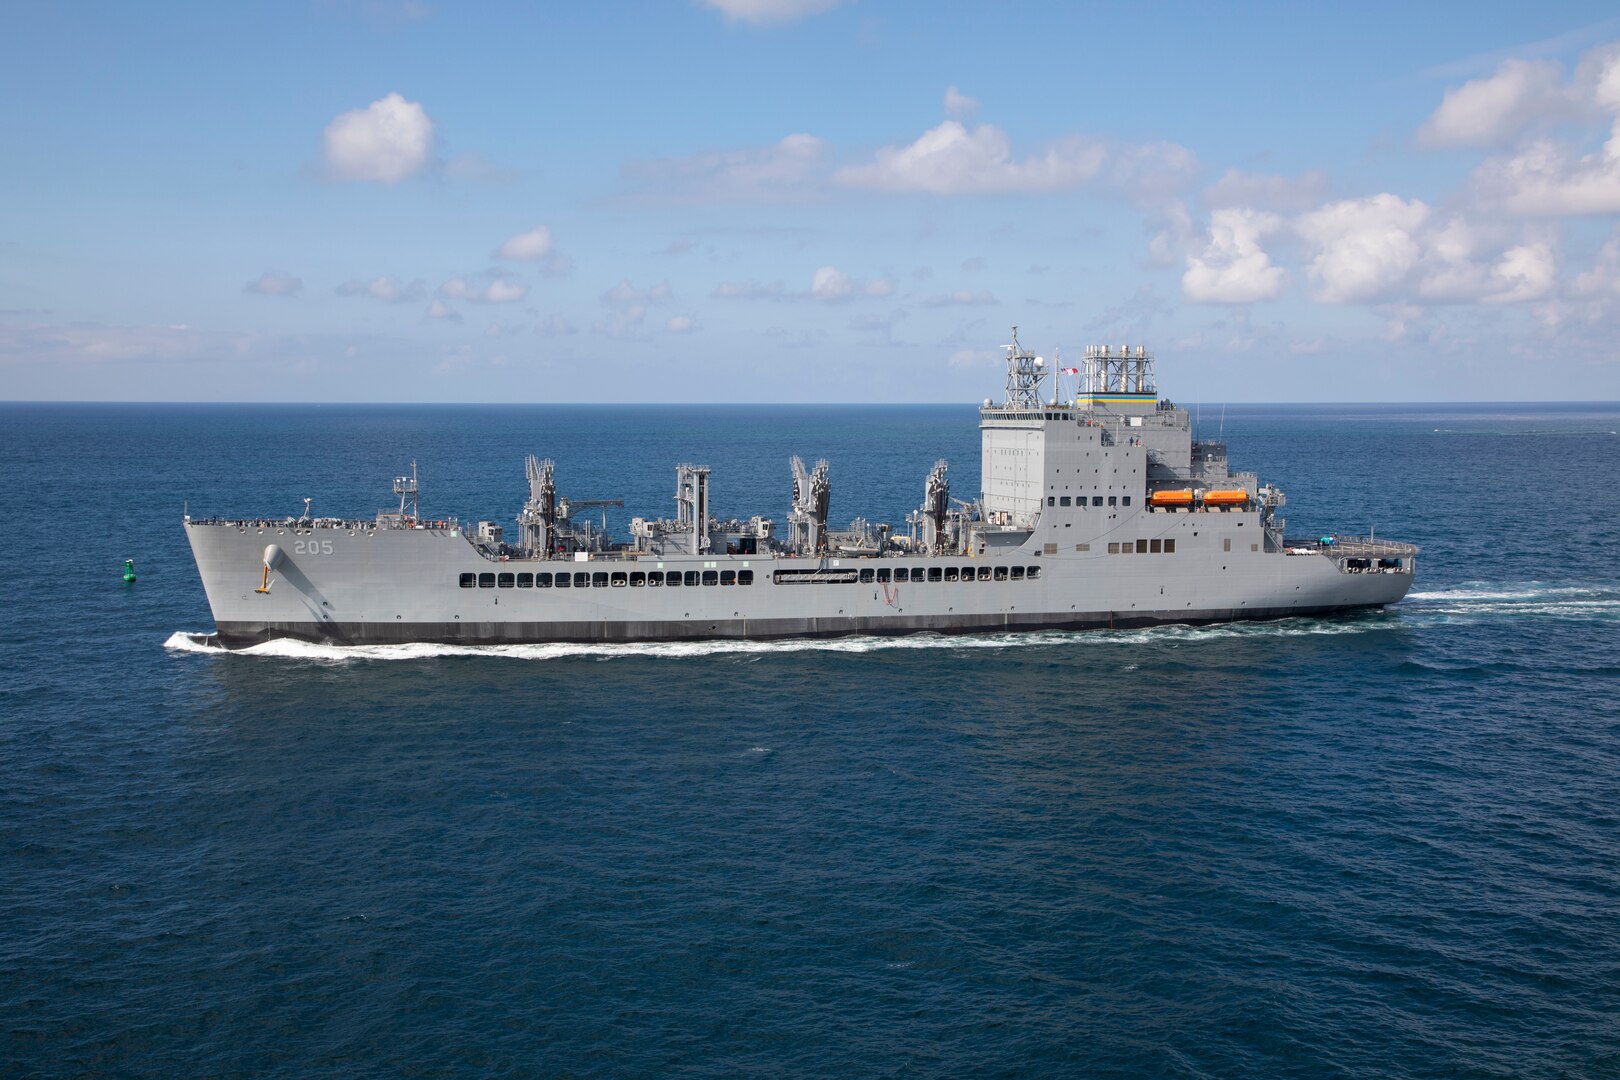 USNS John Lewis (T-AO 205), the Navy’s lead ship of its new class of fleet replenishment oilers, conducted initial Builder’s Trials and returned to port, Feb. 4.